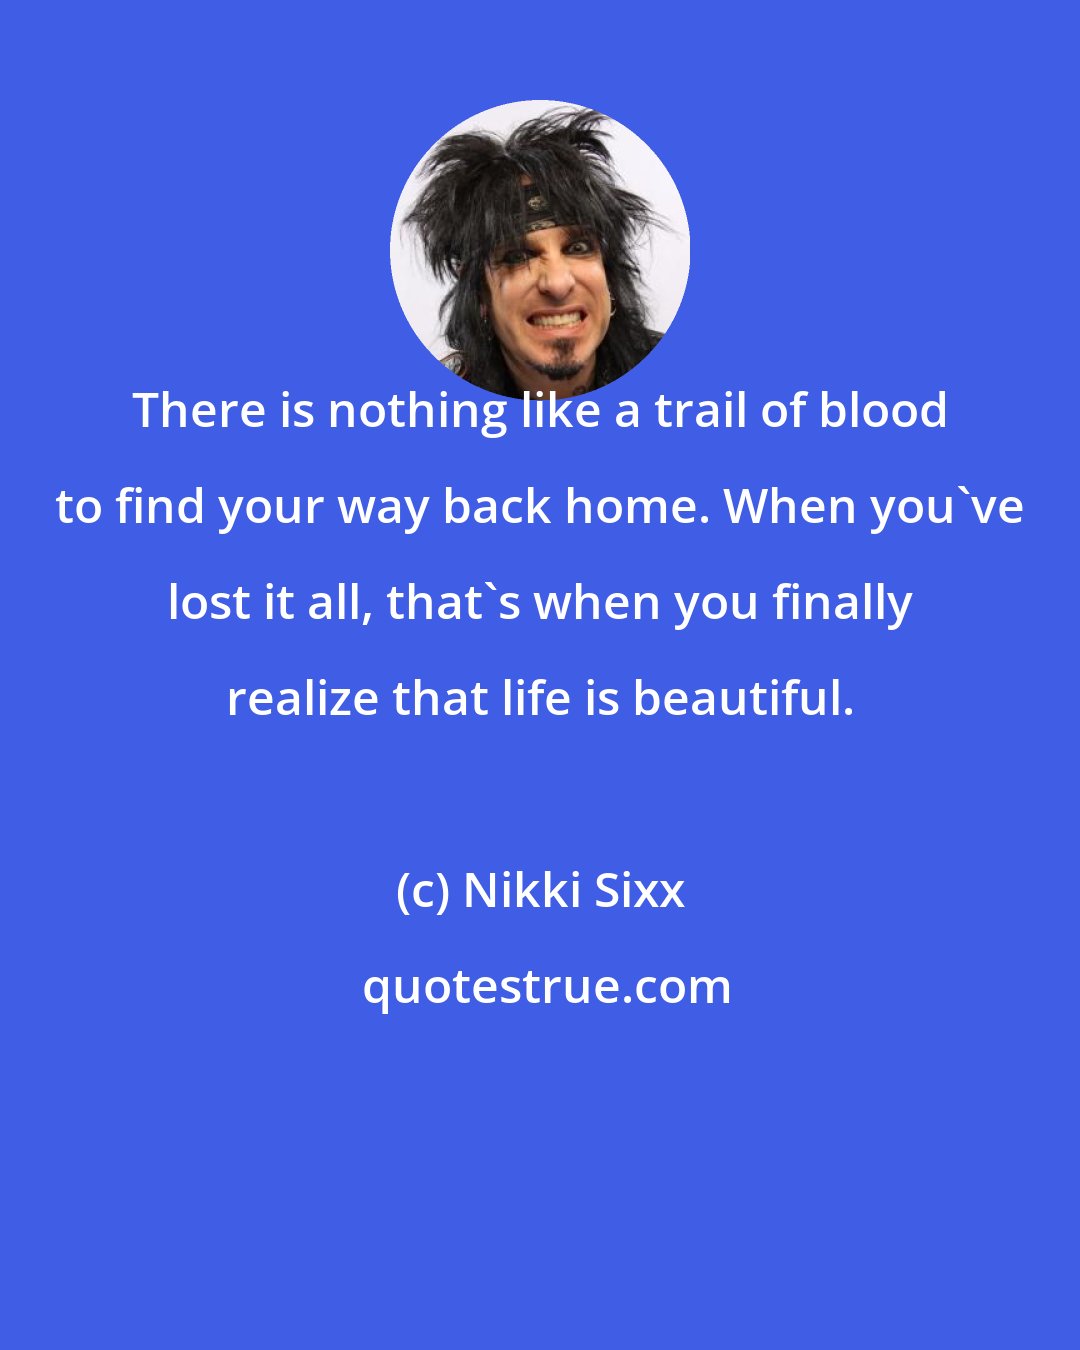 Nikki Sixx: There is nothing like a trail of blood to find your way back home. When you've lost it all, that's when you finally realize that life is beautiful.